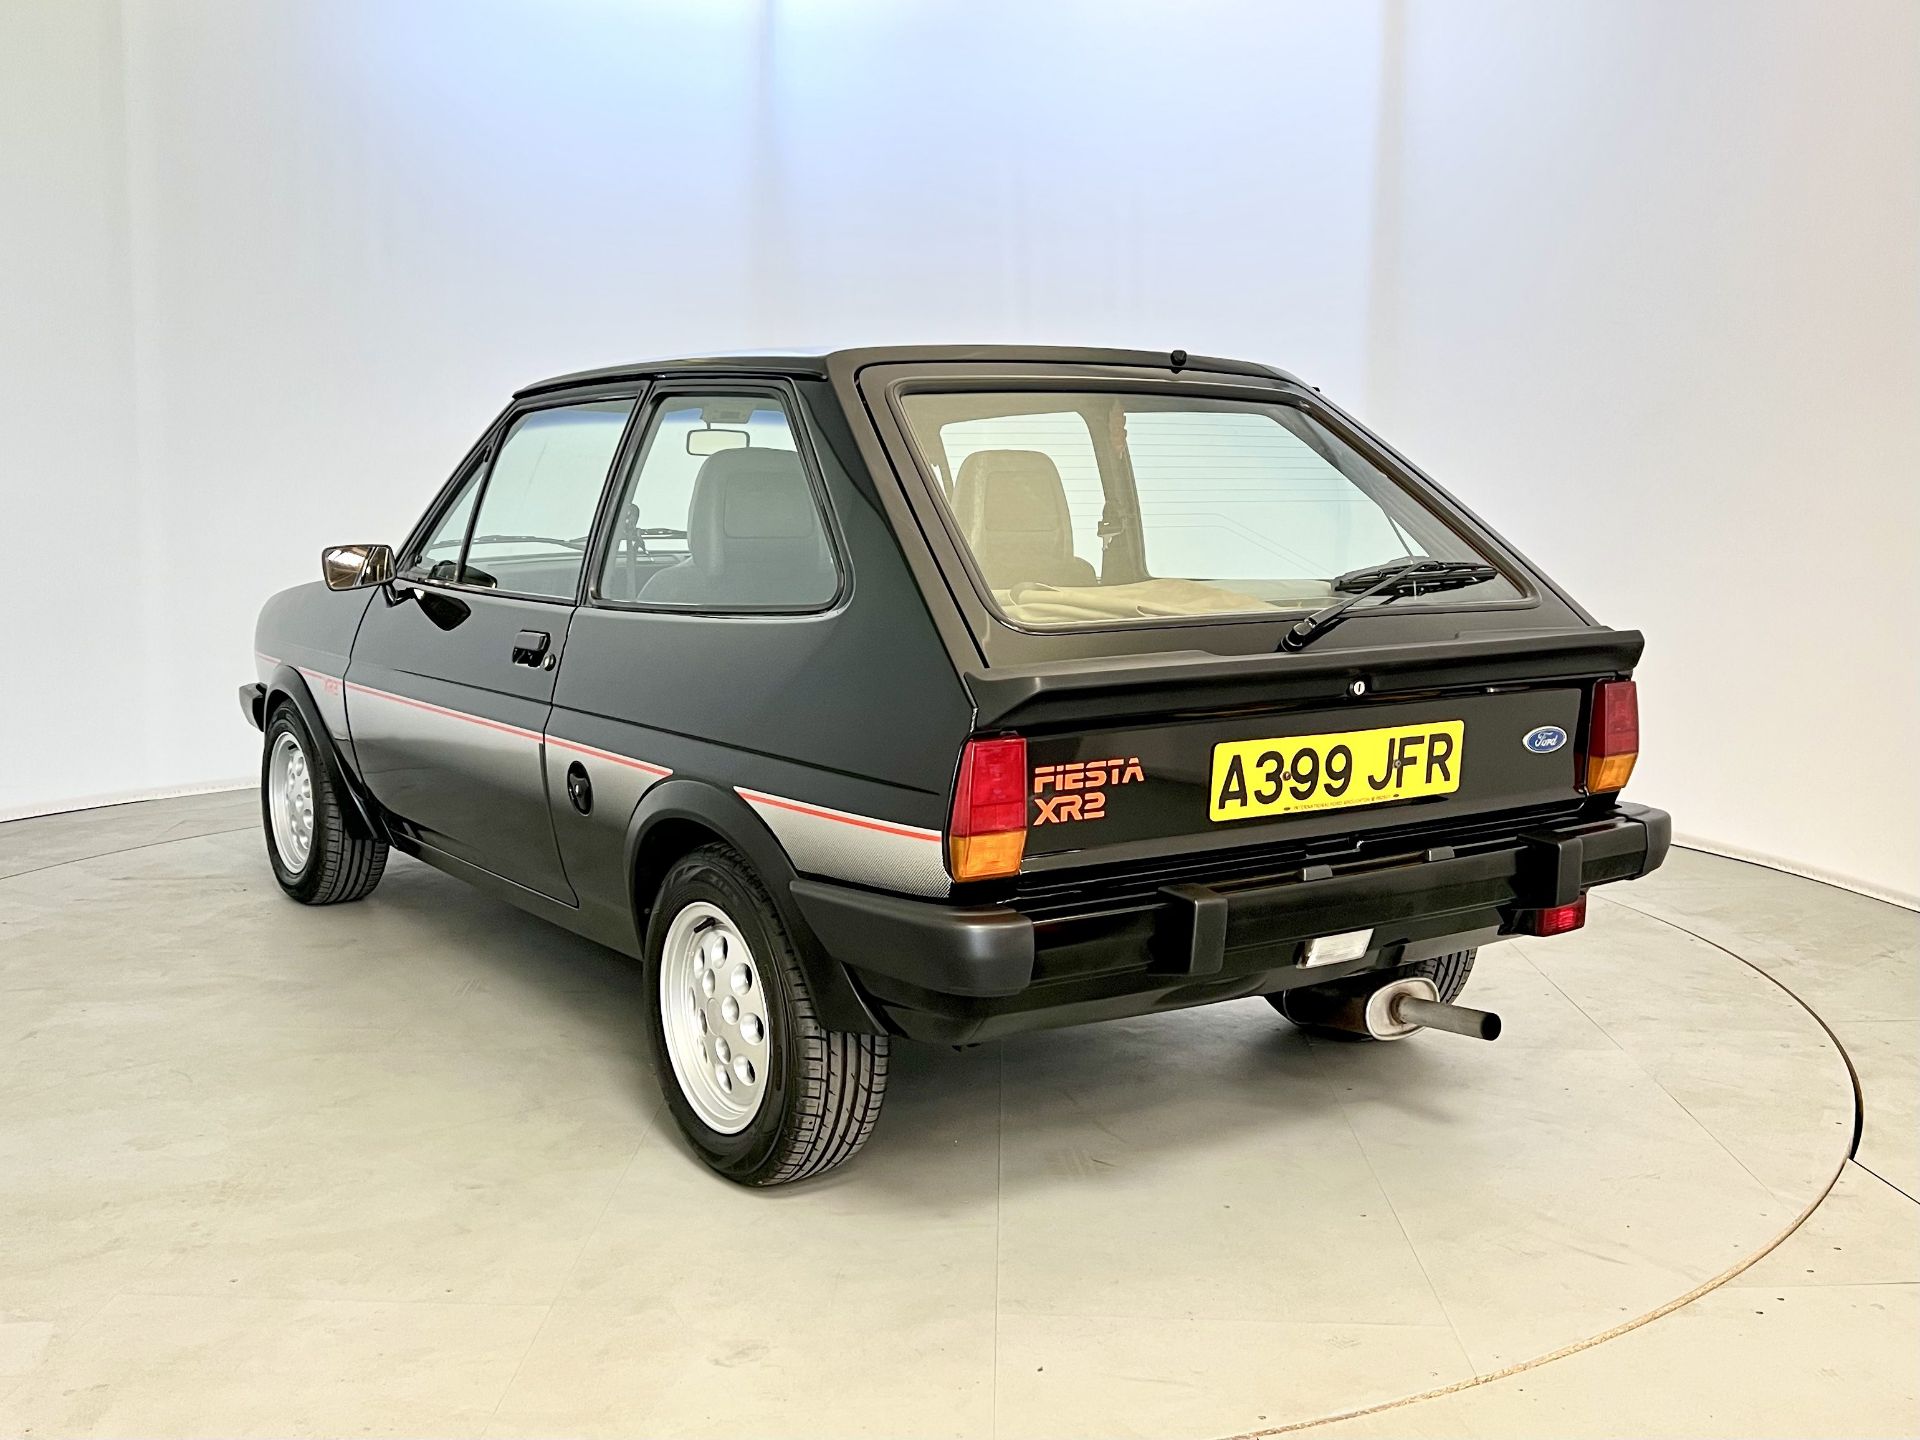 Ford Fiesta XR2 - Image 7 of 33